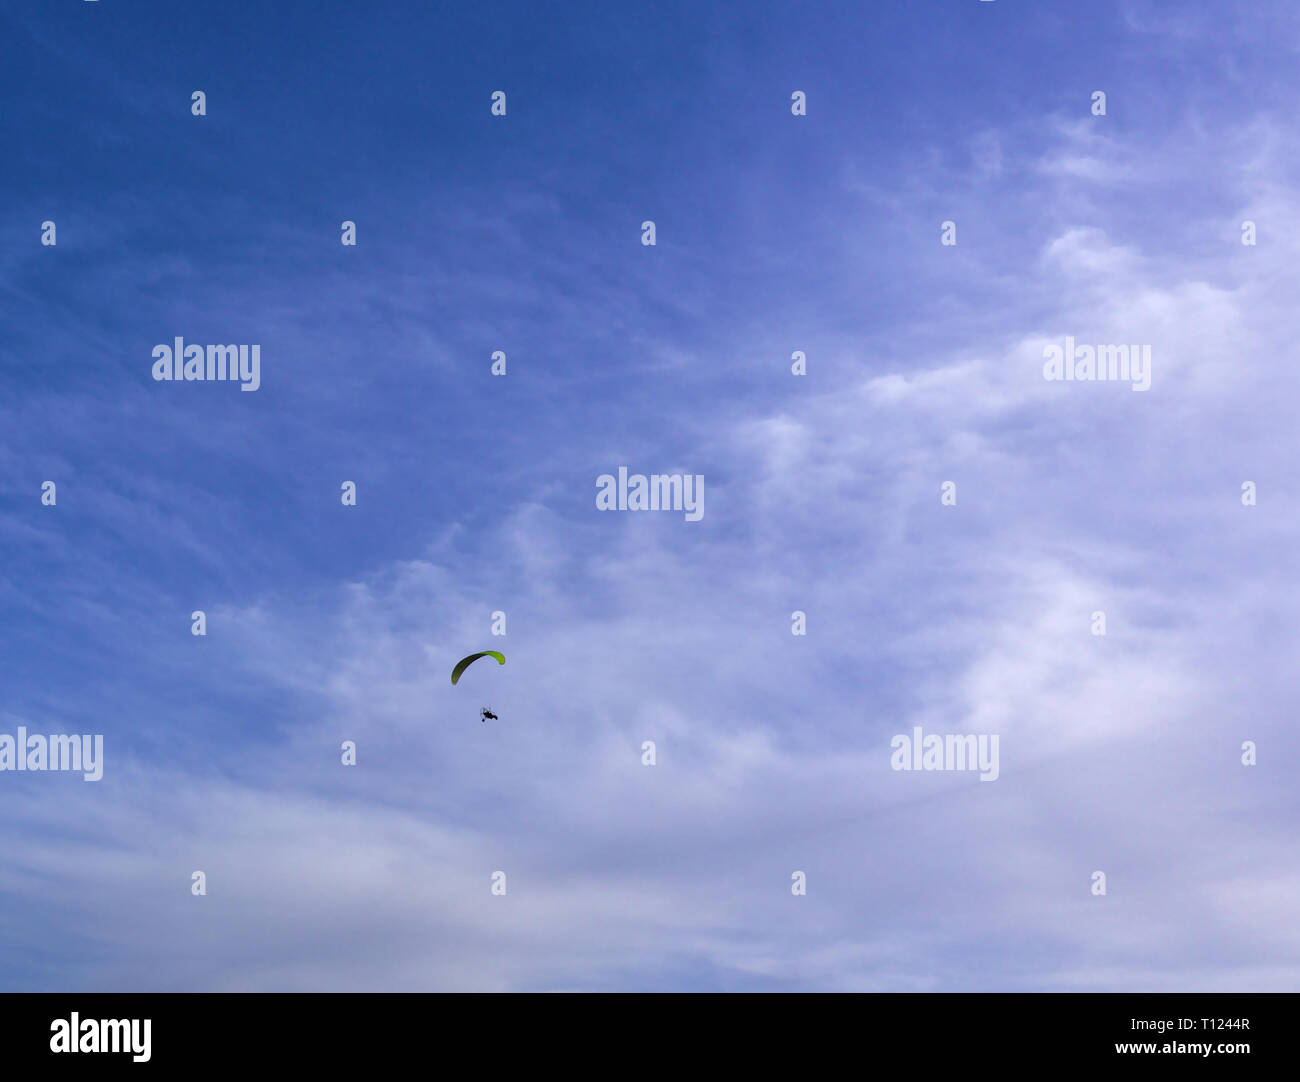 Paraglider flying, deep blue sky with some clouds. Clean Monday holiday. Athens, Greece 2019. Stock Photo